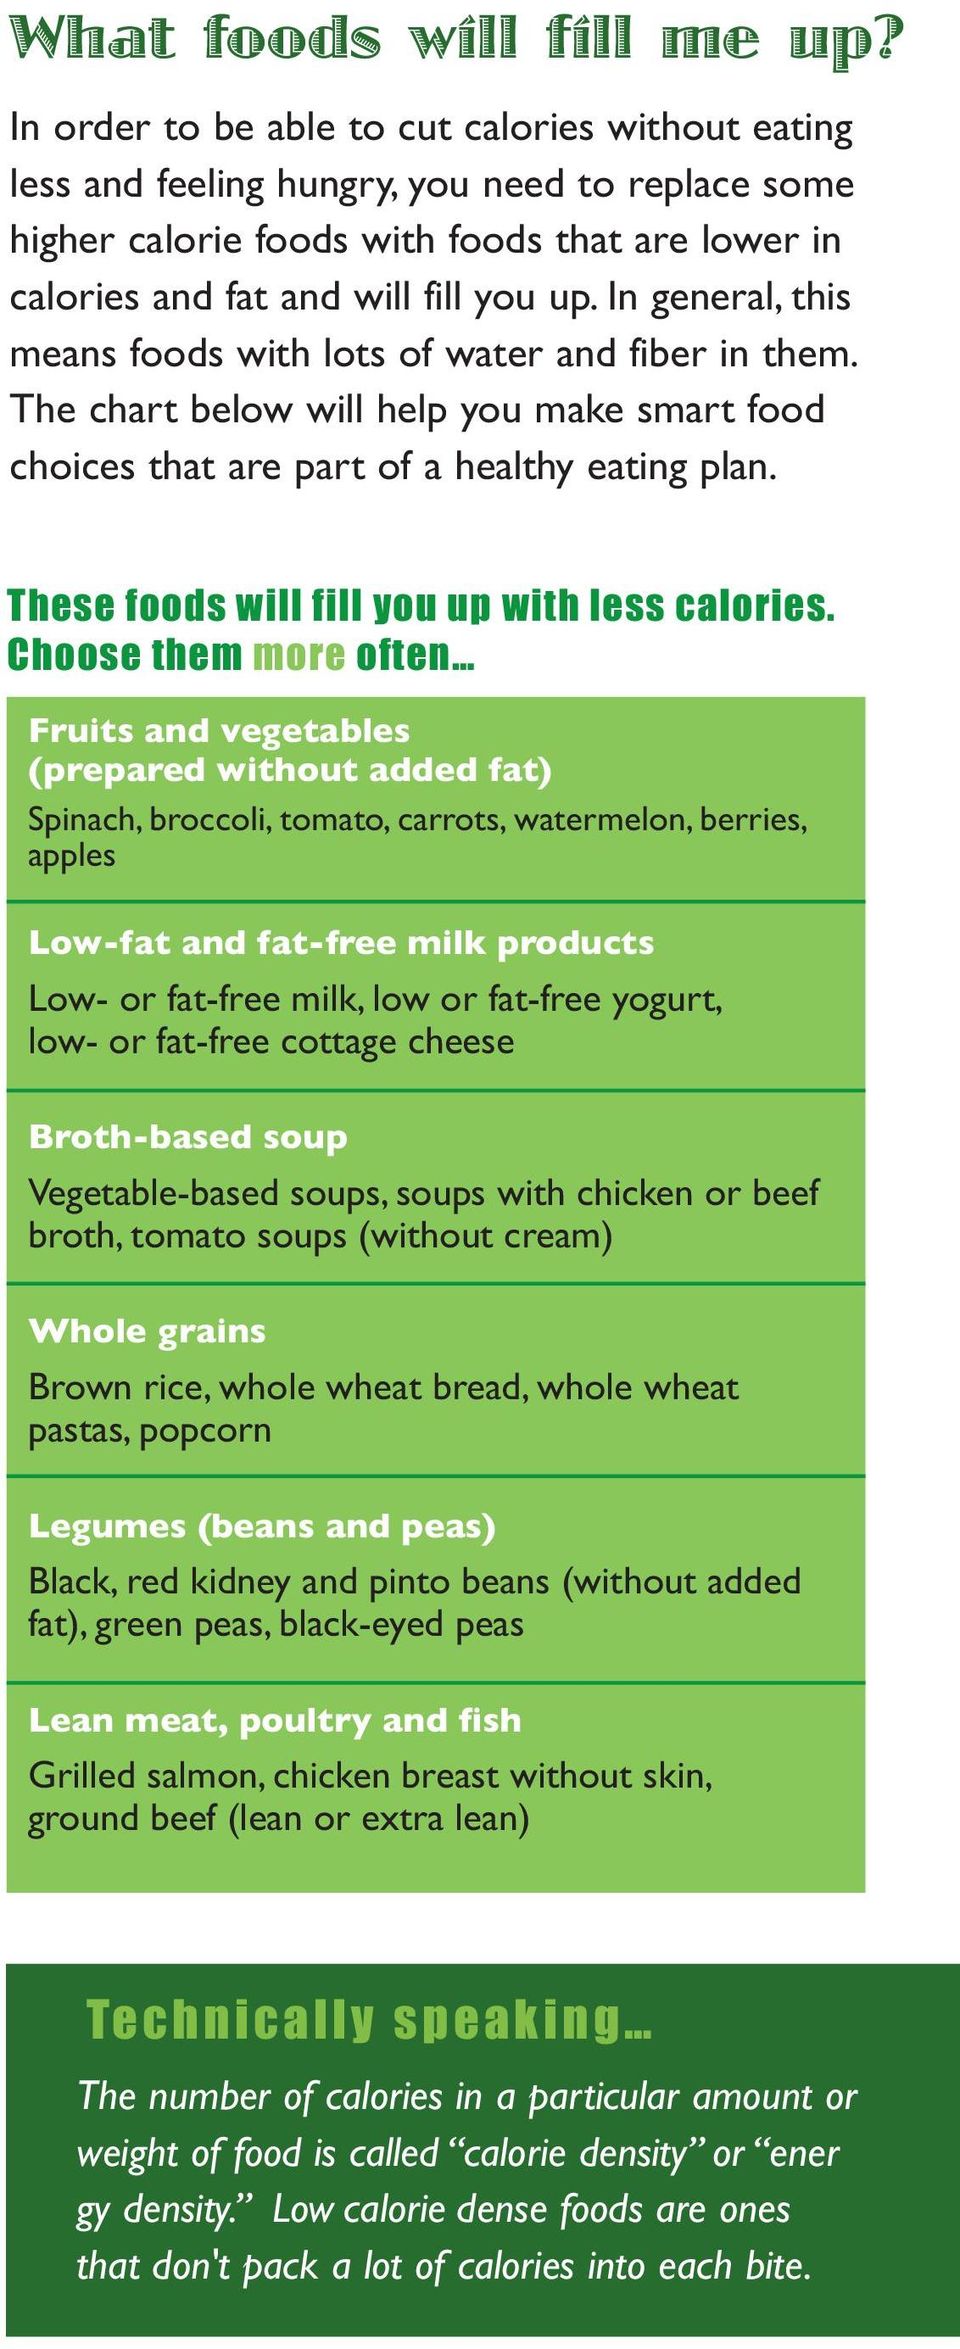 In general, this means foods with lots of water and fiber in them. The chart below will help you make smart food choices that are part of a healthy eating plan.